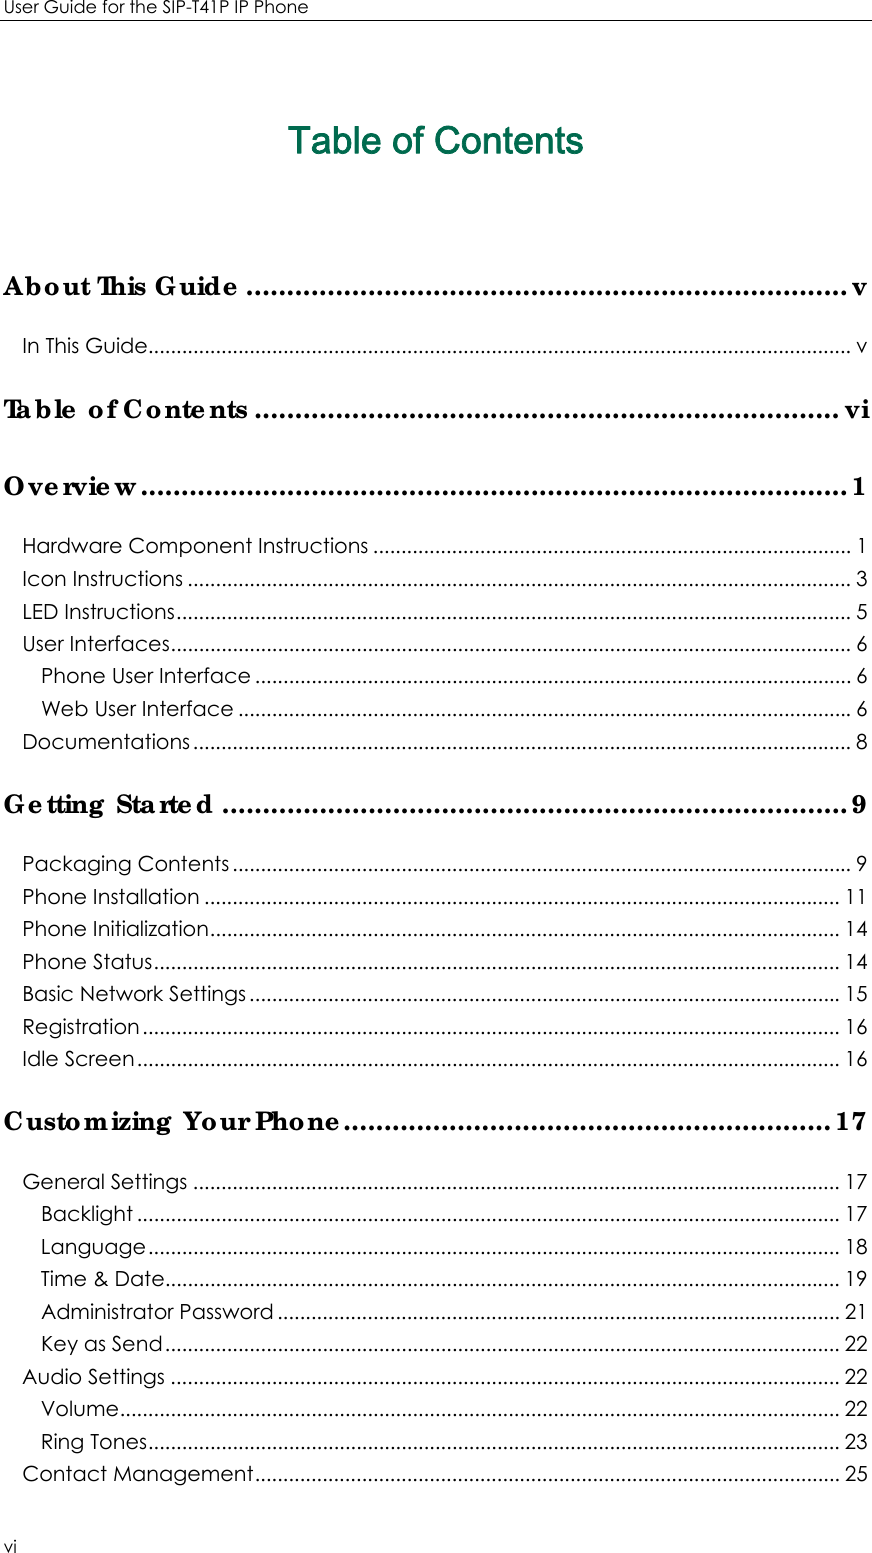 User Guide for the SIP-T41P IP Phone vi Table of Contents About This Guide .......................................................................... vIn This Guide............................................................................................................................. vTable of Contents ........................................................................ viOverview ....................................................................................... 1Hardware Component Instructions ..................................................................................... 1Icon Instructions ...................................................................................................................... 3LED Instructions ........................................................................................................................ 5User Interfaces ......................................................................................................................... 6Phone User Interface .......................................................................................................... 6Web User Interface ............................................................................................................. 6Documentations ..................................................................................................................... 8Getting Started ............................................................................. 9Packaging Contents .............................................................................................................. 9Phone Installation ................................................................................................................. 11Phone Initialization ................................................................................................................ 14Phone Status .......................................................................................................................... 14Basic Network Settings ......................................................................................................... 15Registration ............................................................................................................................ 16Idle Screen ............................................................................................................................. 16Customizing Your Phone............................................................ 17General Settings ................................................................................................................... 17Backlight ............................................................................................................................. 17Language ........................................................................................................................... 18Time &amp; Date........................................................................................................................ 19Administrator Password .................................................................................................... 21Key as Send ........................................................................................................................ 22Audio Settings ....................................................................................................................... 22Volu me ................................................................................................................................ 22Ring Tones ........................................................................................................................... 23Contact Management ........................................................................................................ 25